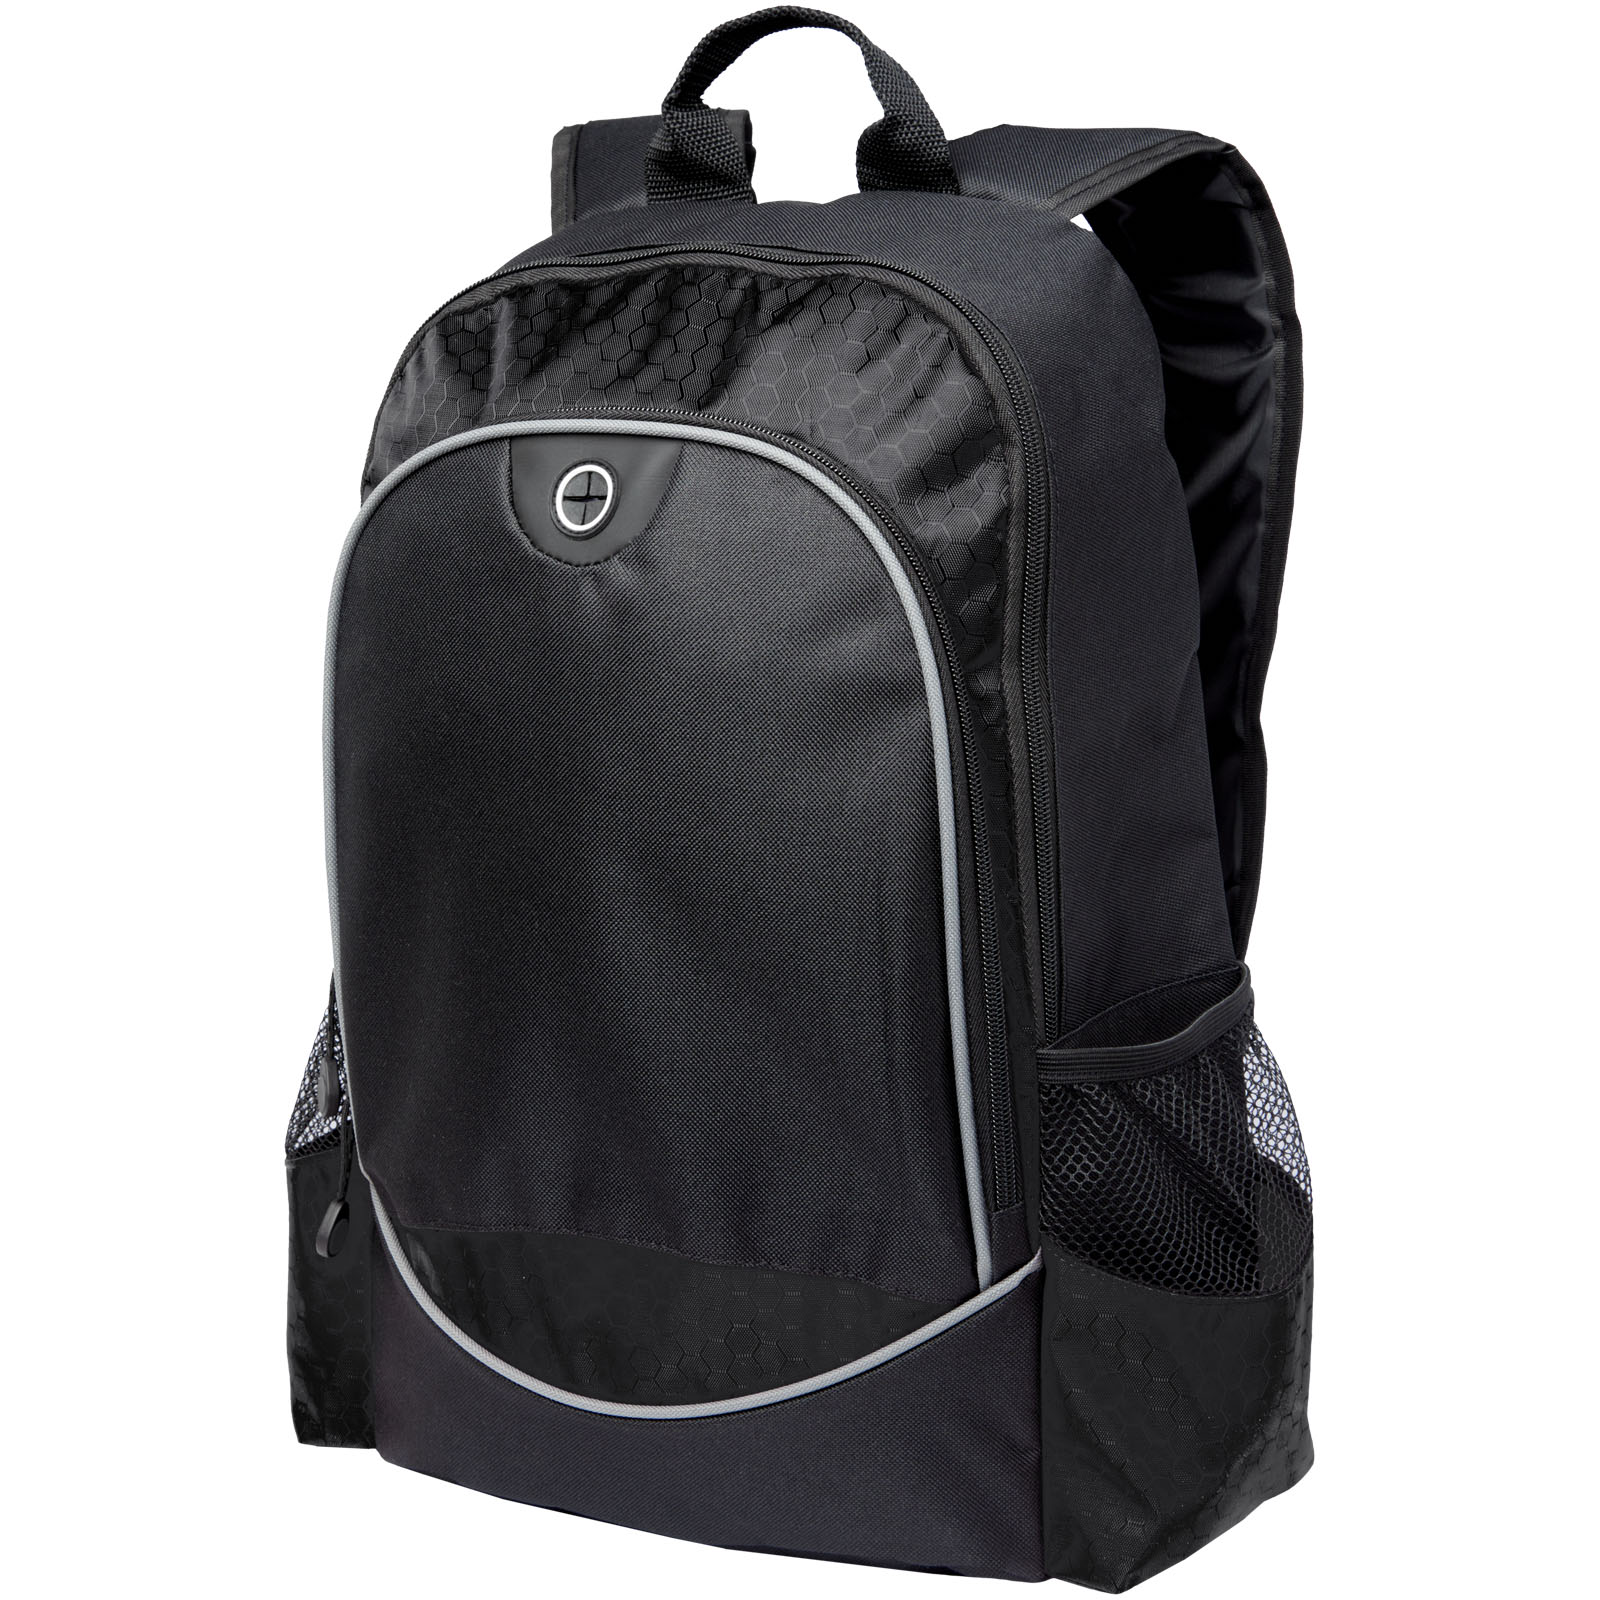 15" Laptop and Tablet Backpack - Johnson Fold